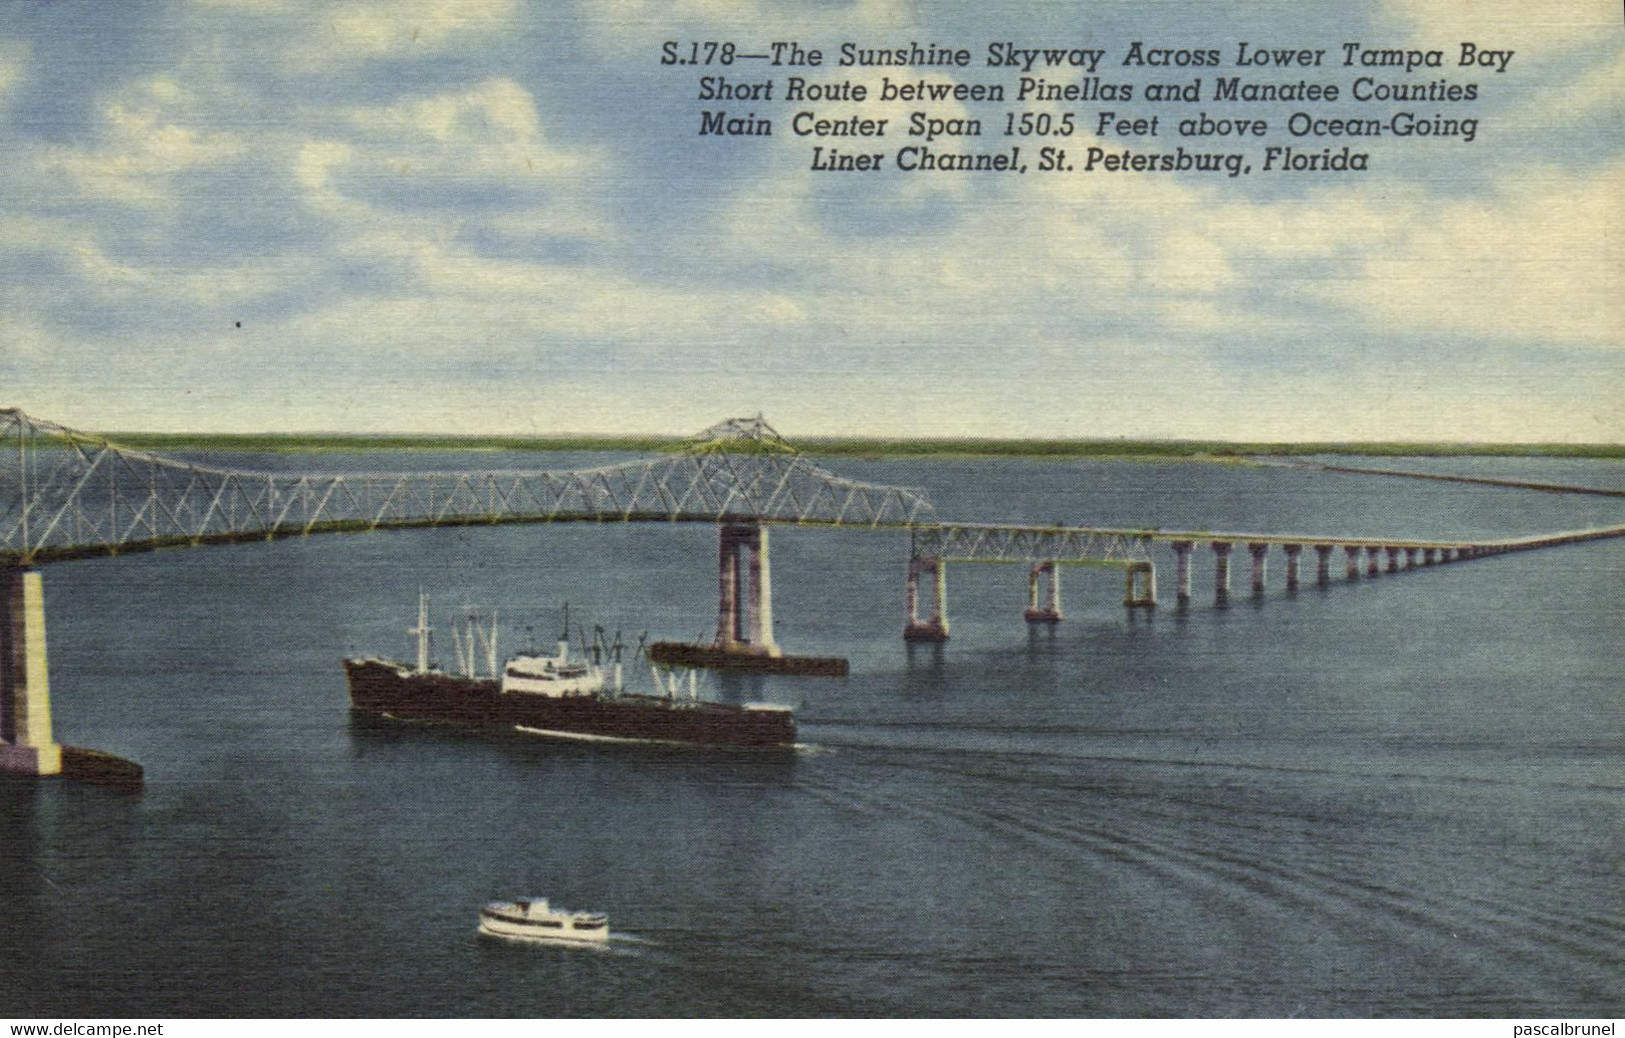 TAMPA - THE SUNSHINE SKYWAY ACROSS LOWER TAMPA BAY - SHORT ROUTE BETWEEN PINELLAS AND MANATEE COUNTIES - Tampa